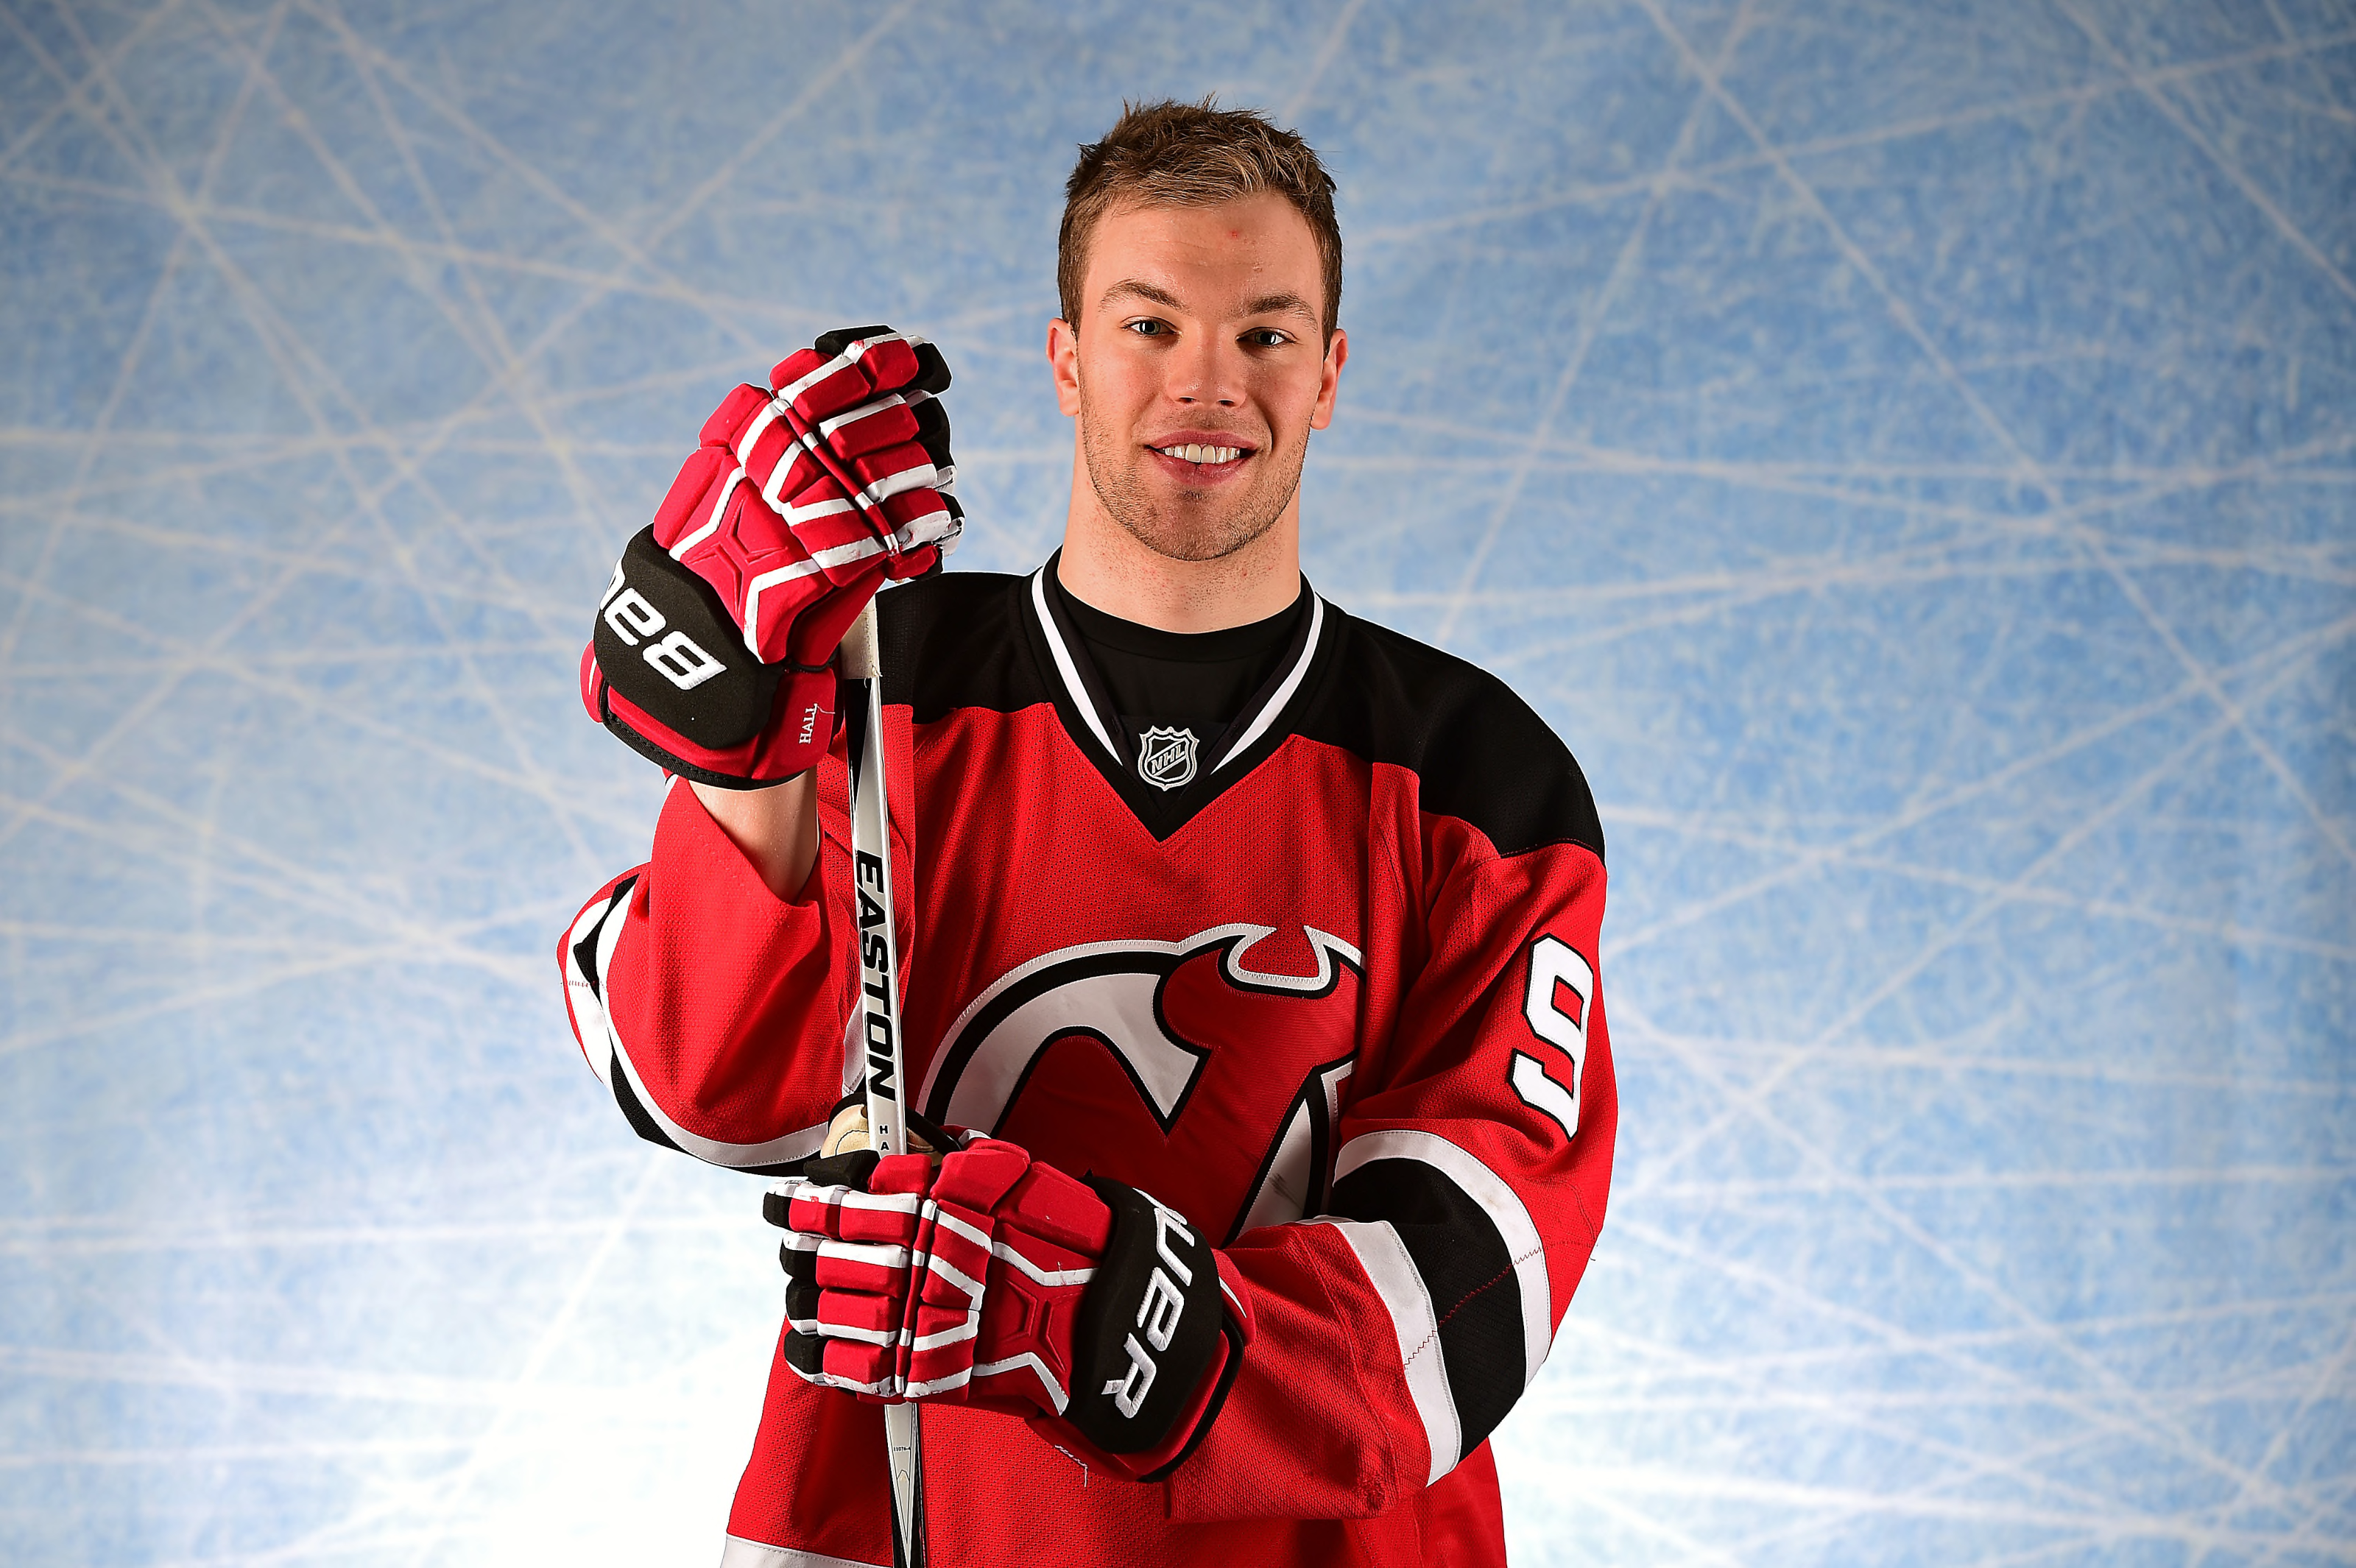 NHL All Star Shares His First Day As A New Jersey Devil